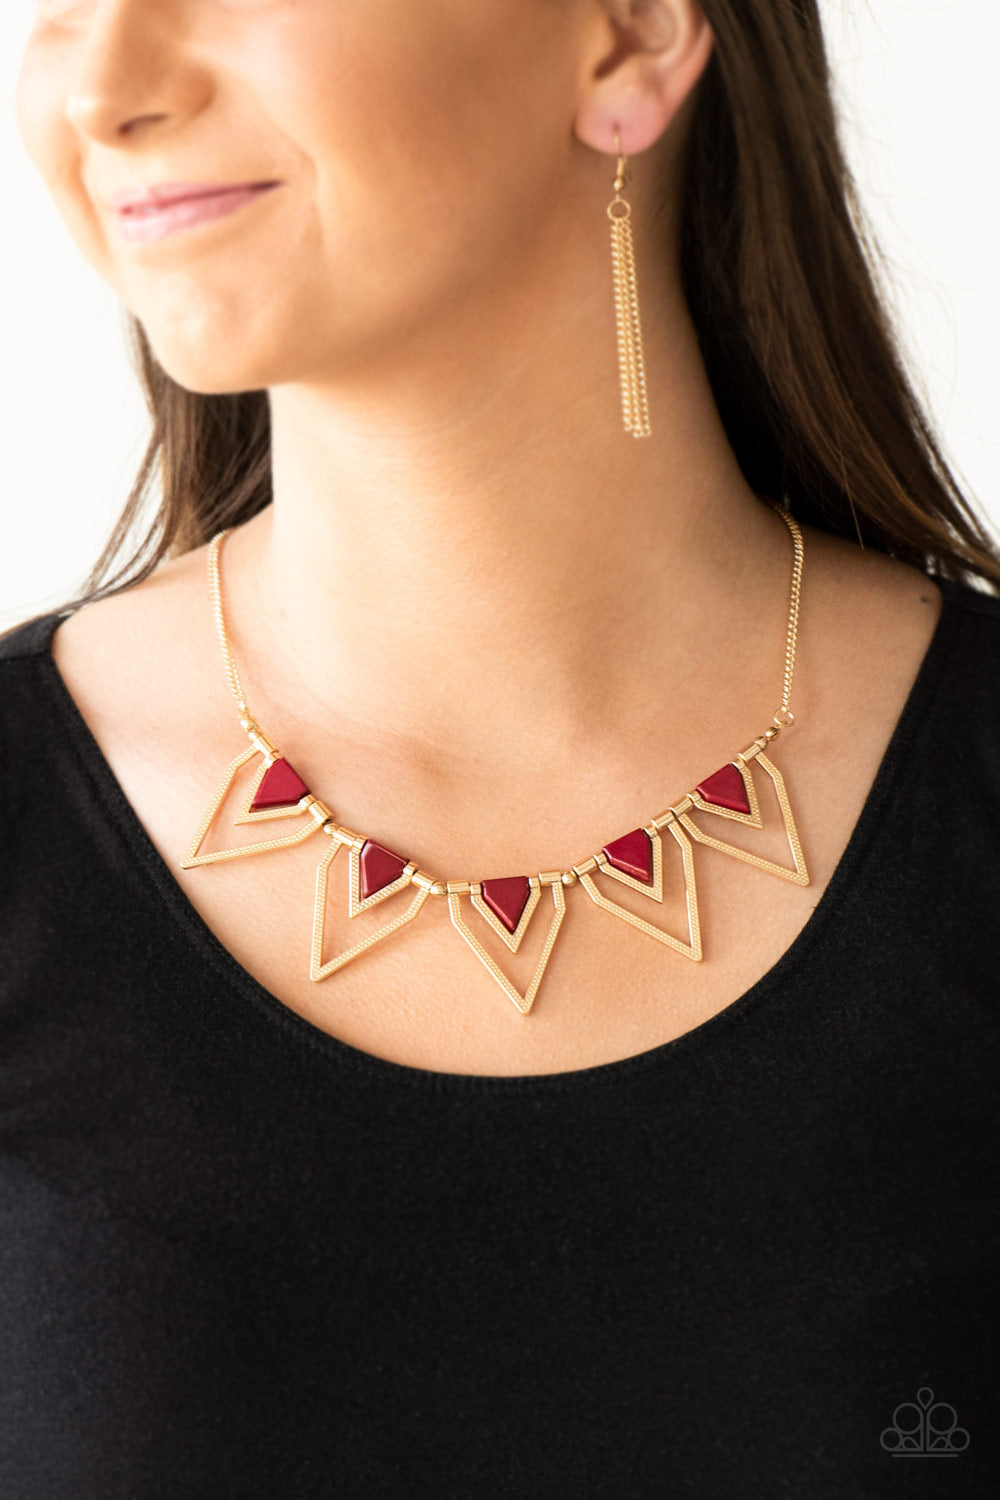 Paparazzi "The Pack Leader" - Red Gold Triangular Geometric Necklace